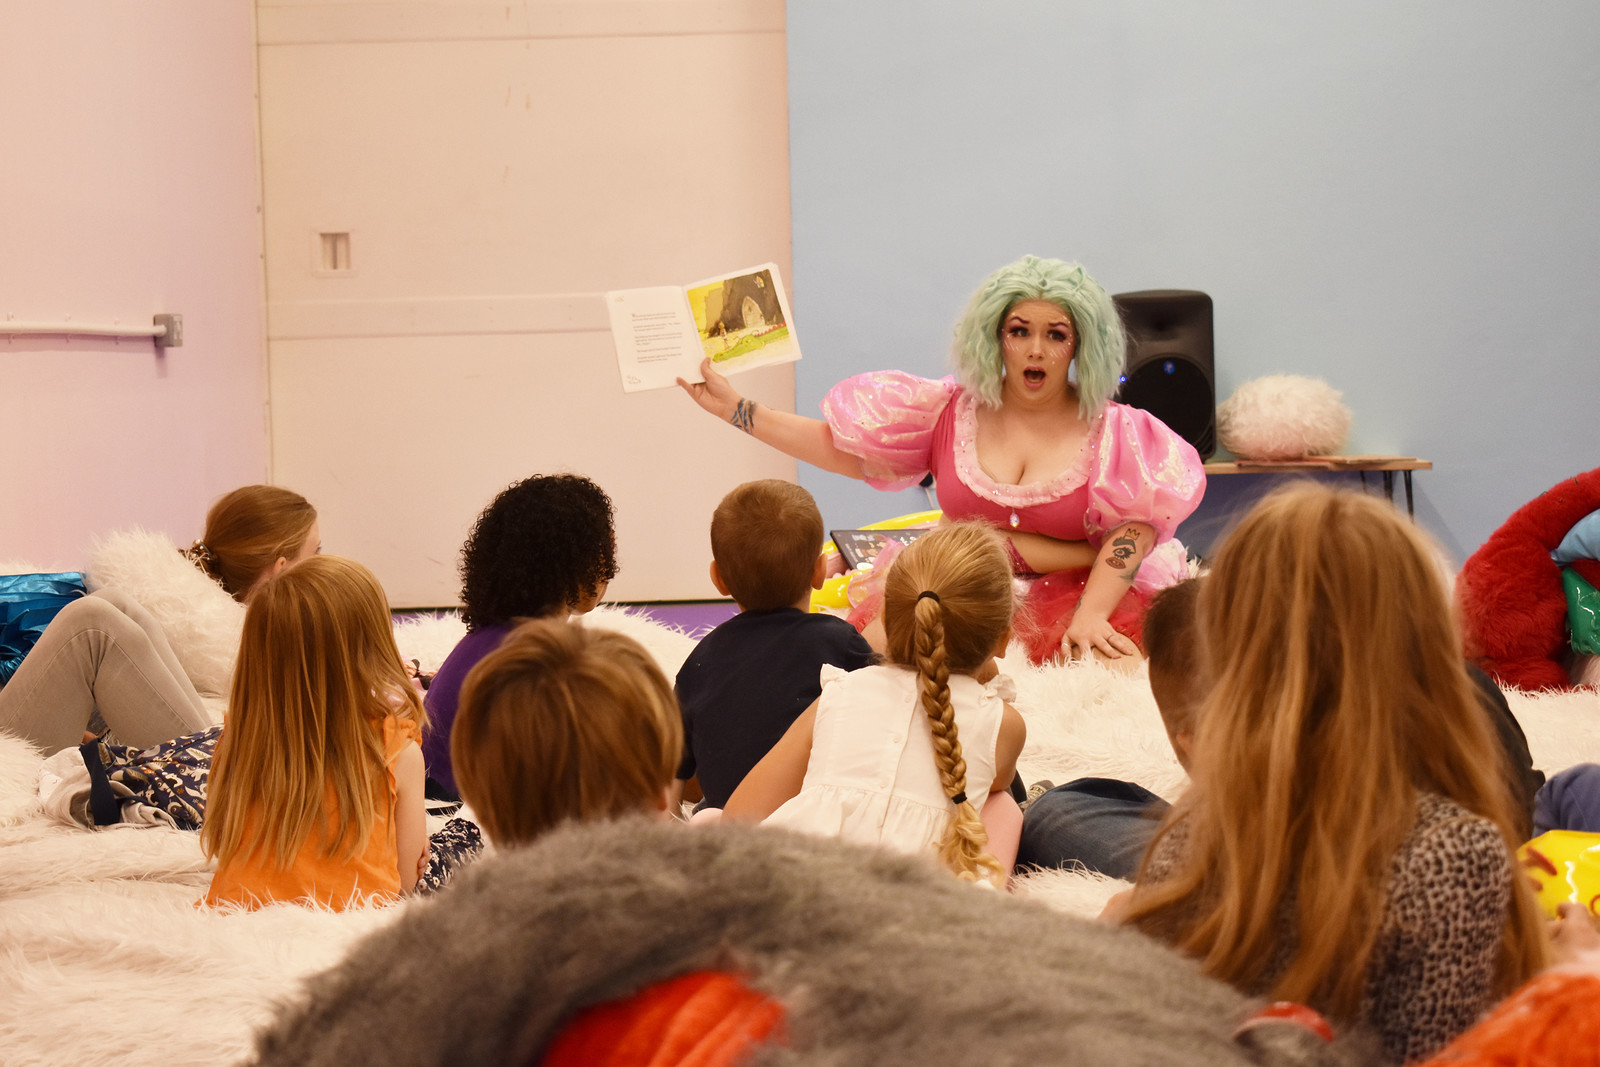 WE ARE FAMILY: DRAG QUEEN STORY TIME at Arnolfini